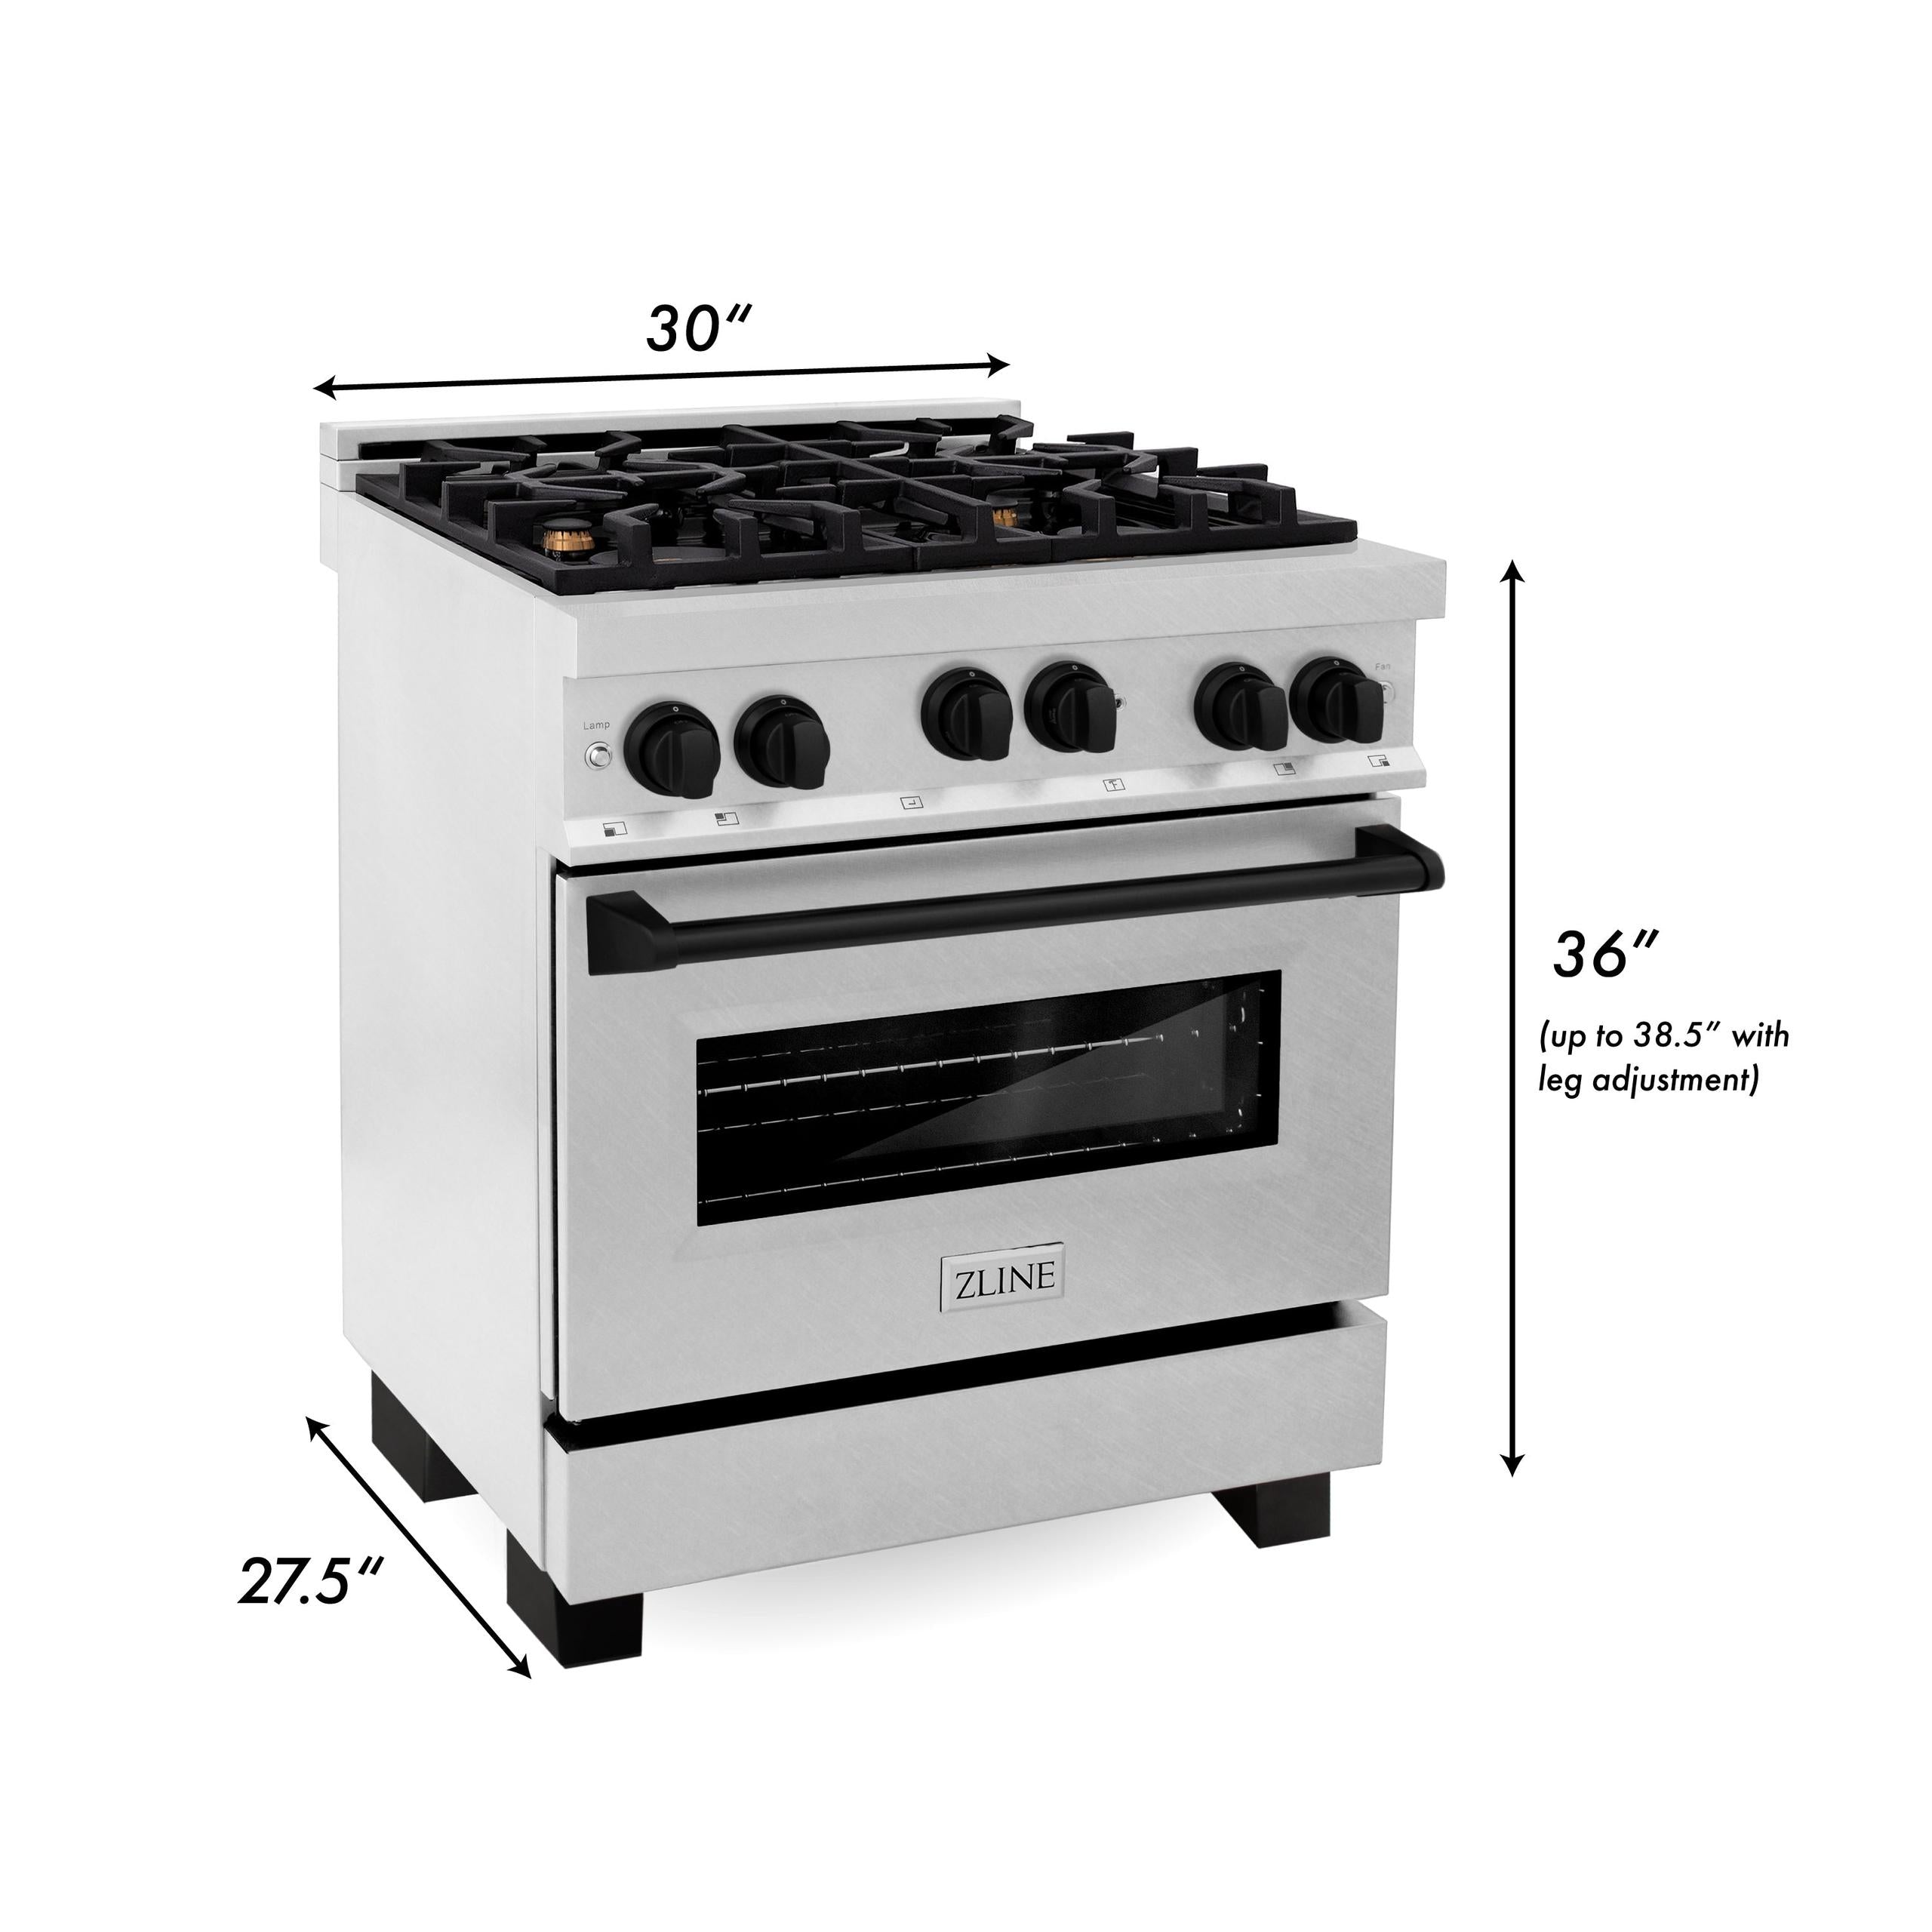 ZLINE KITCHEN AND BATH RGSZSN30G ZLINE 30" 4.0 cu. ft. Range with Gas Stove and Gas Oven in DuraSnow R Stainless Steel with Accents Accent: Gold